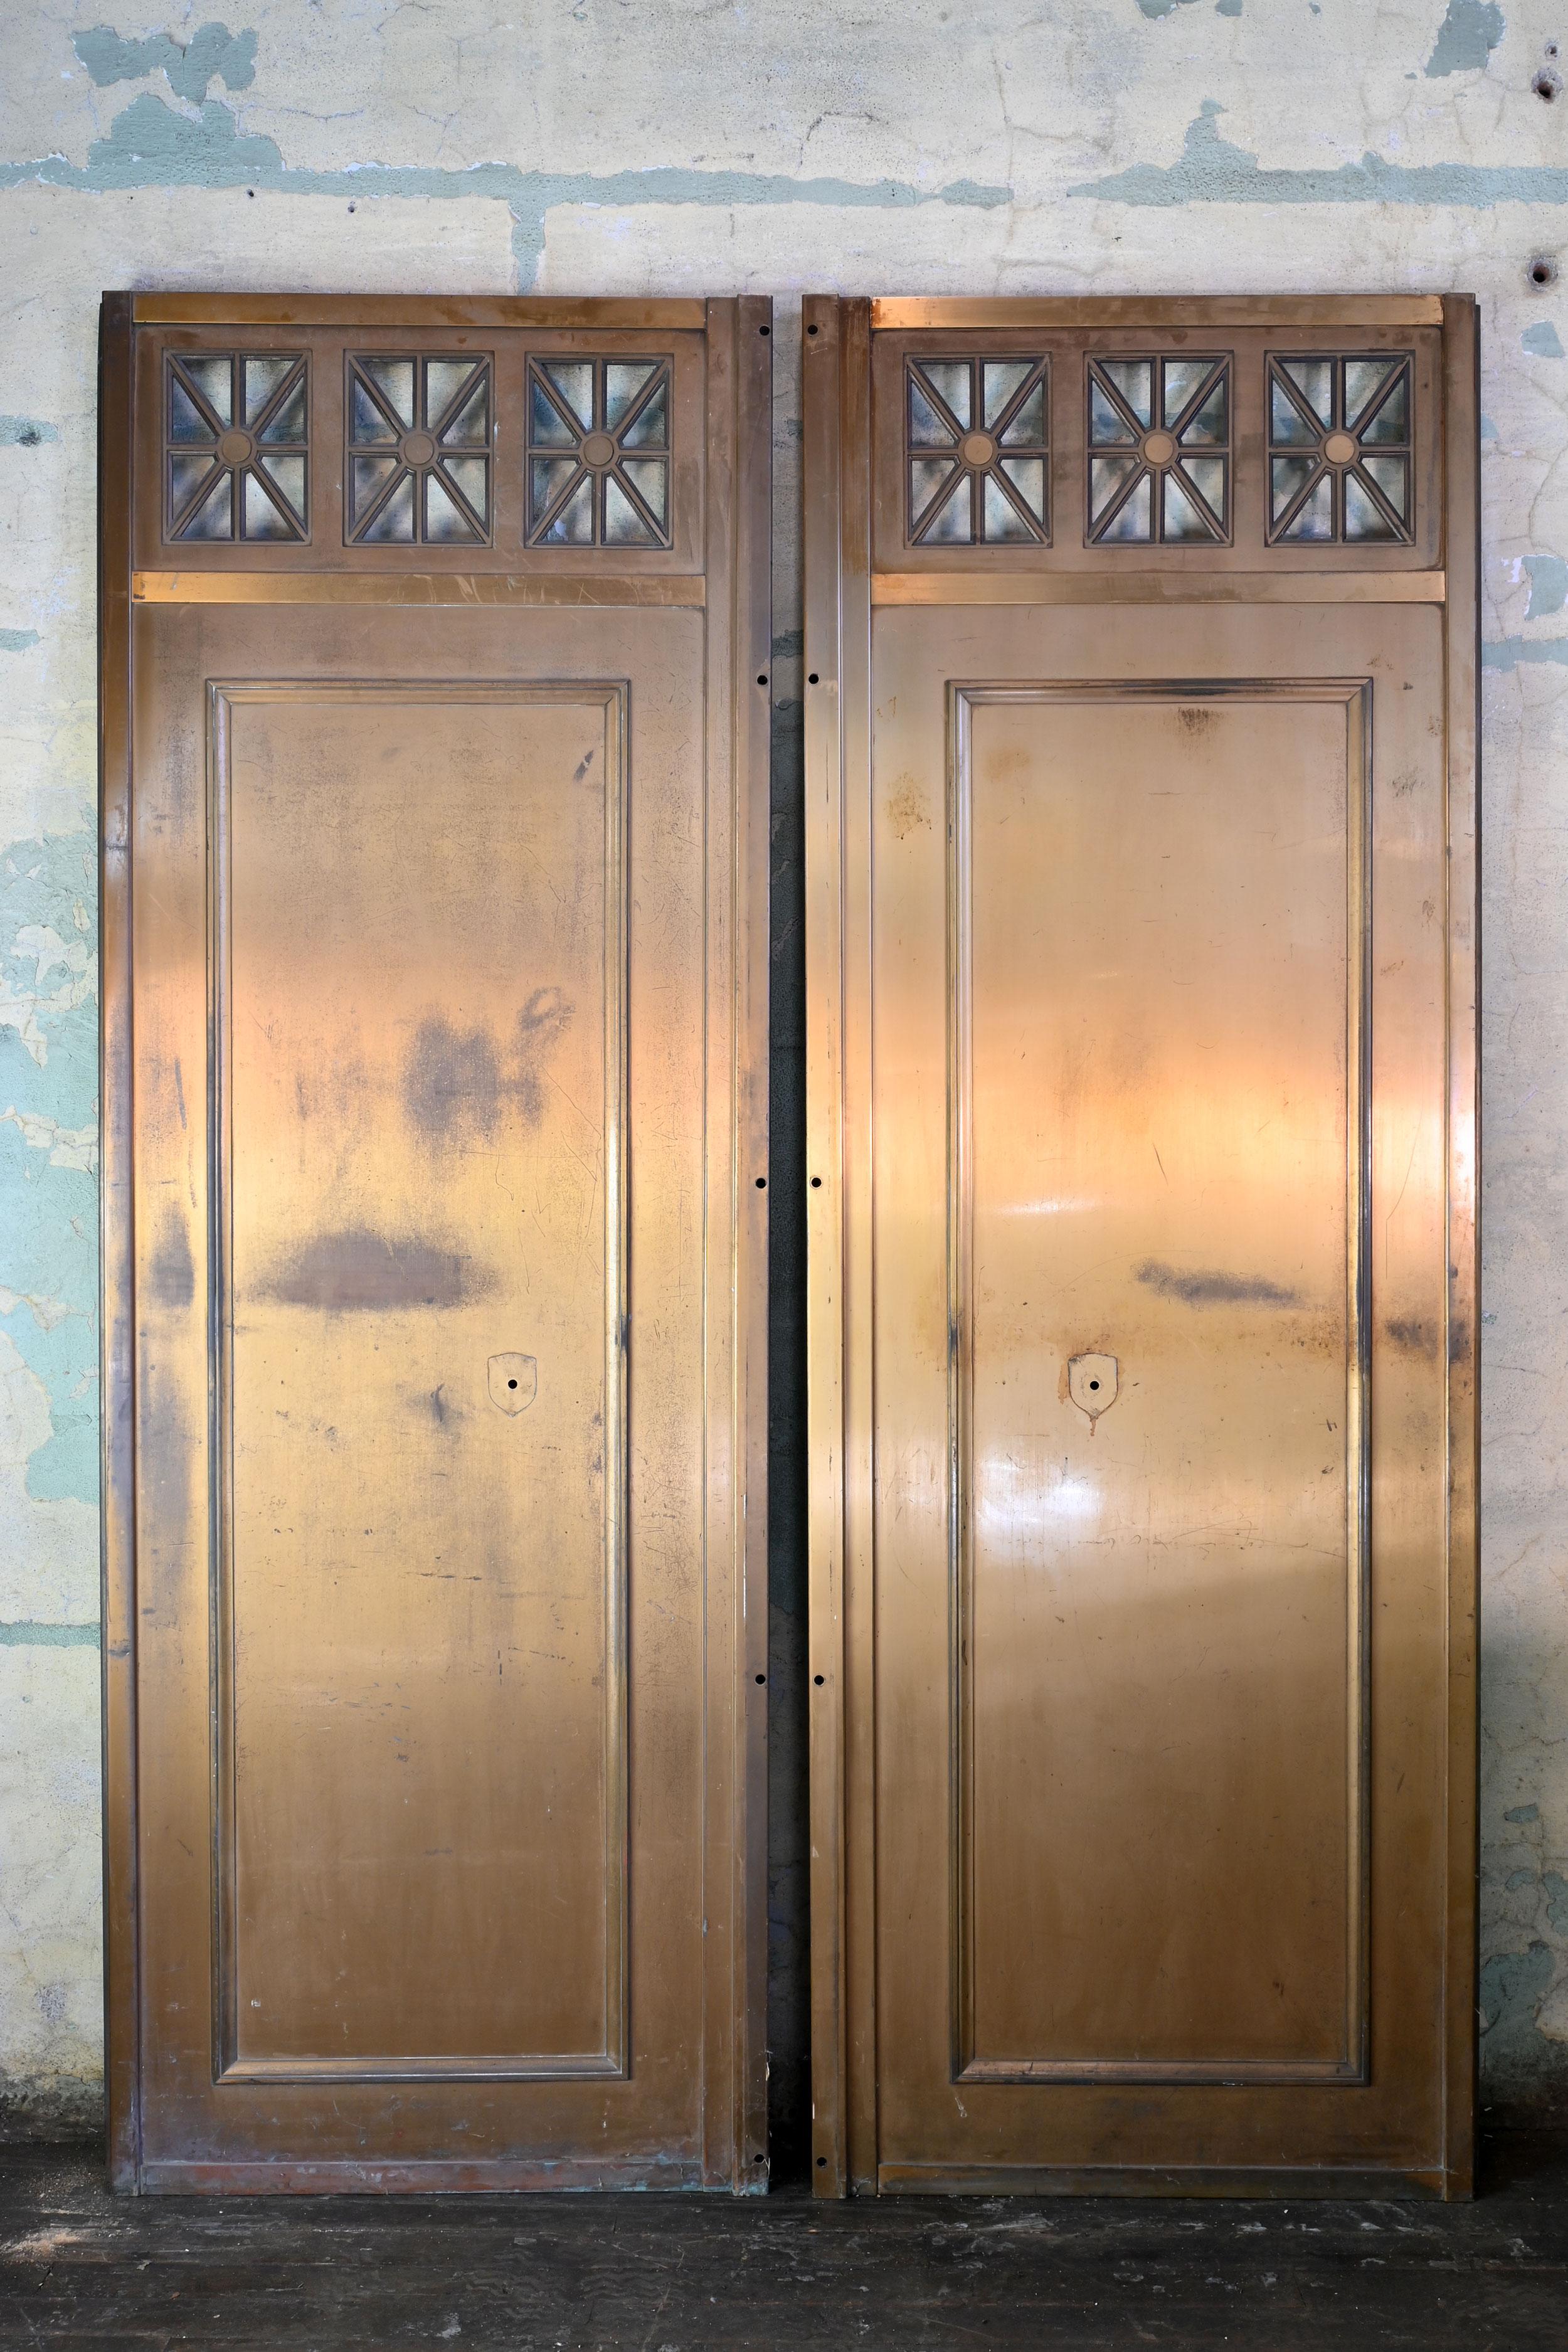 These elevator doors are a wonderful piece with great brass patina. They feature top vents with geometric deco styling and have a mounting space for brass backplates, no longer a part of the piece. Similar holes in the edges are where there once was